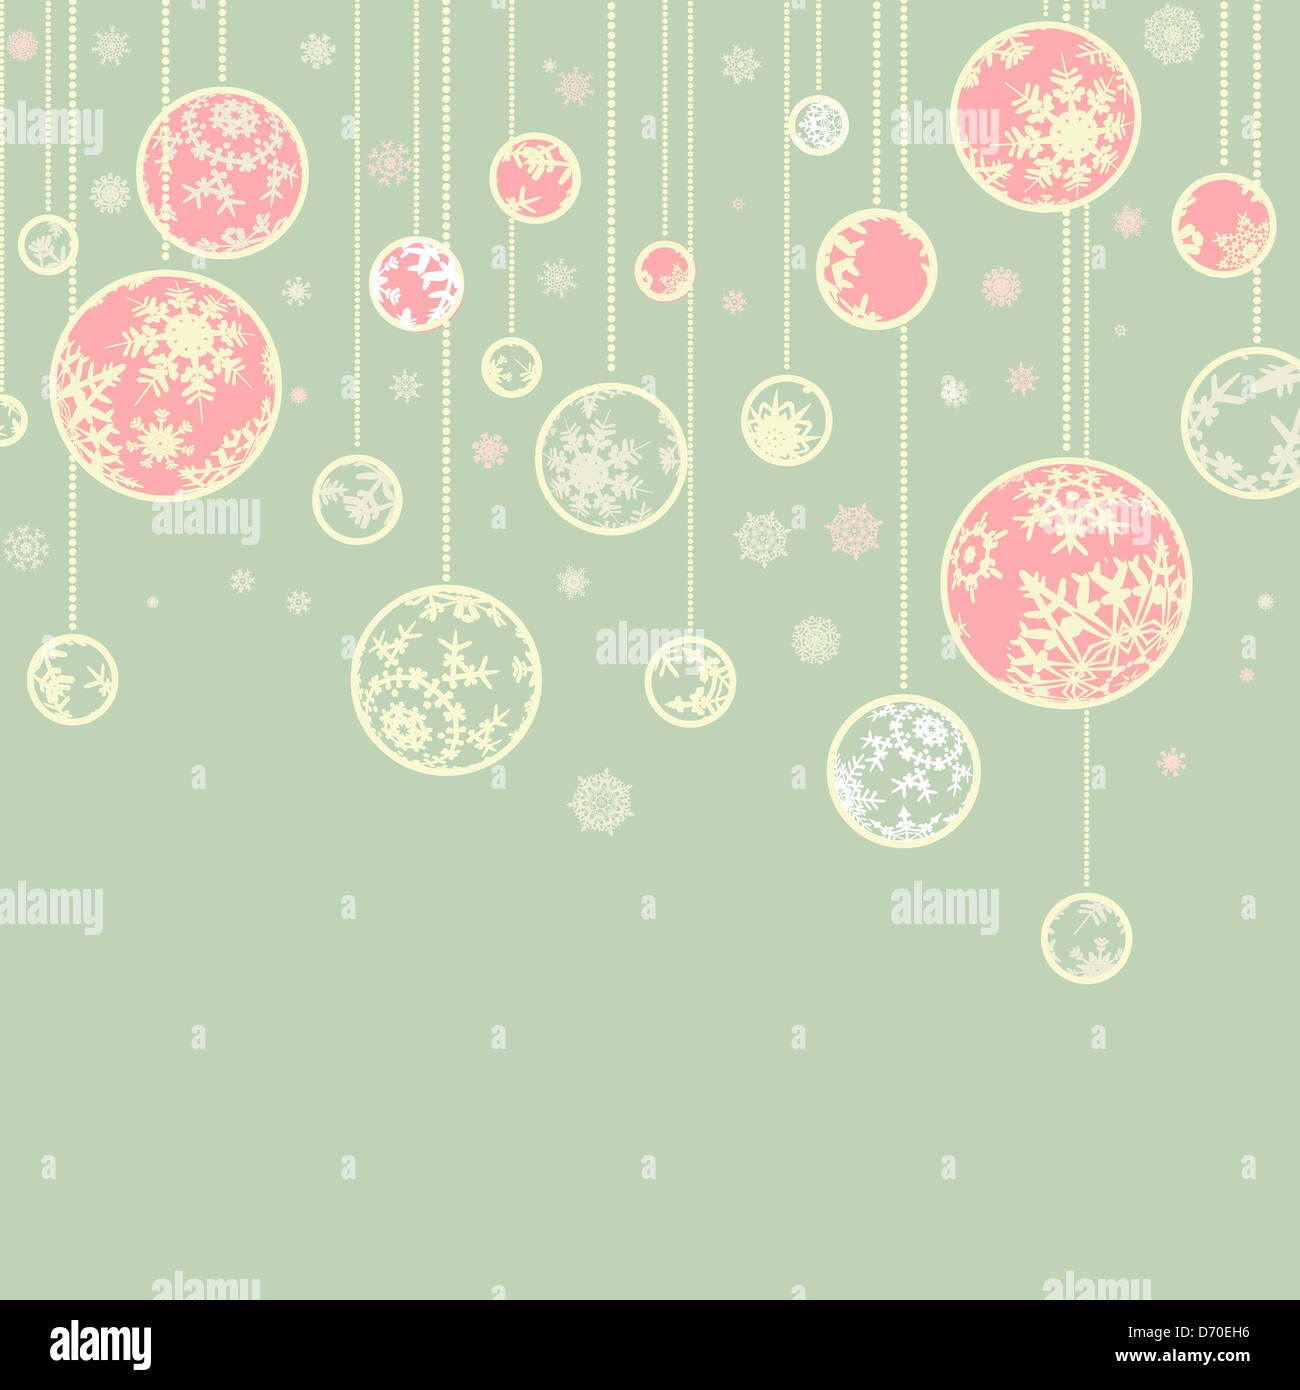 Retro christmas template with ball and snowflakes for vintage card design Stock Photo